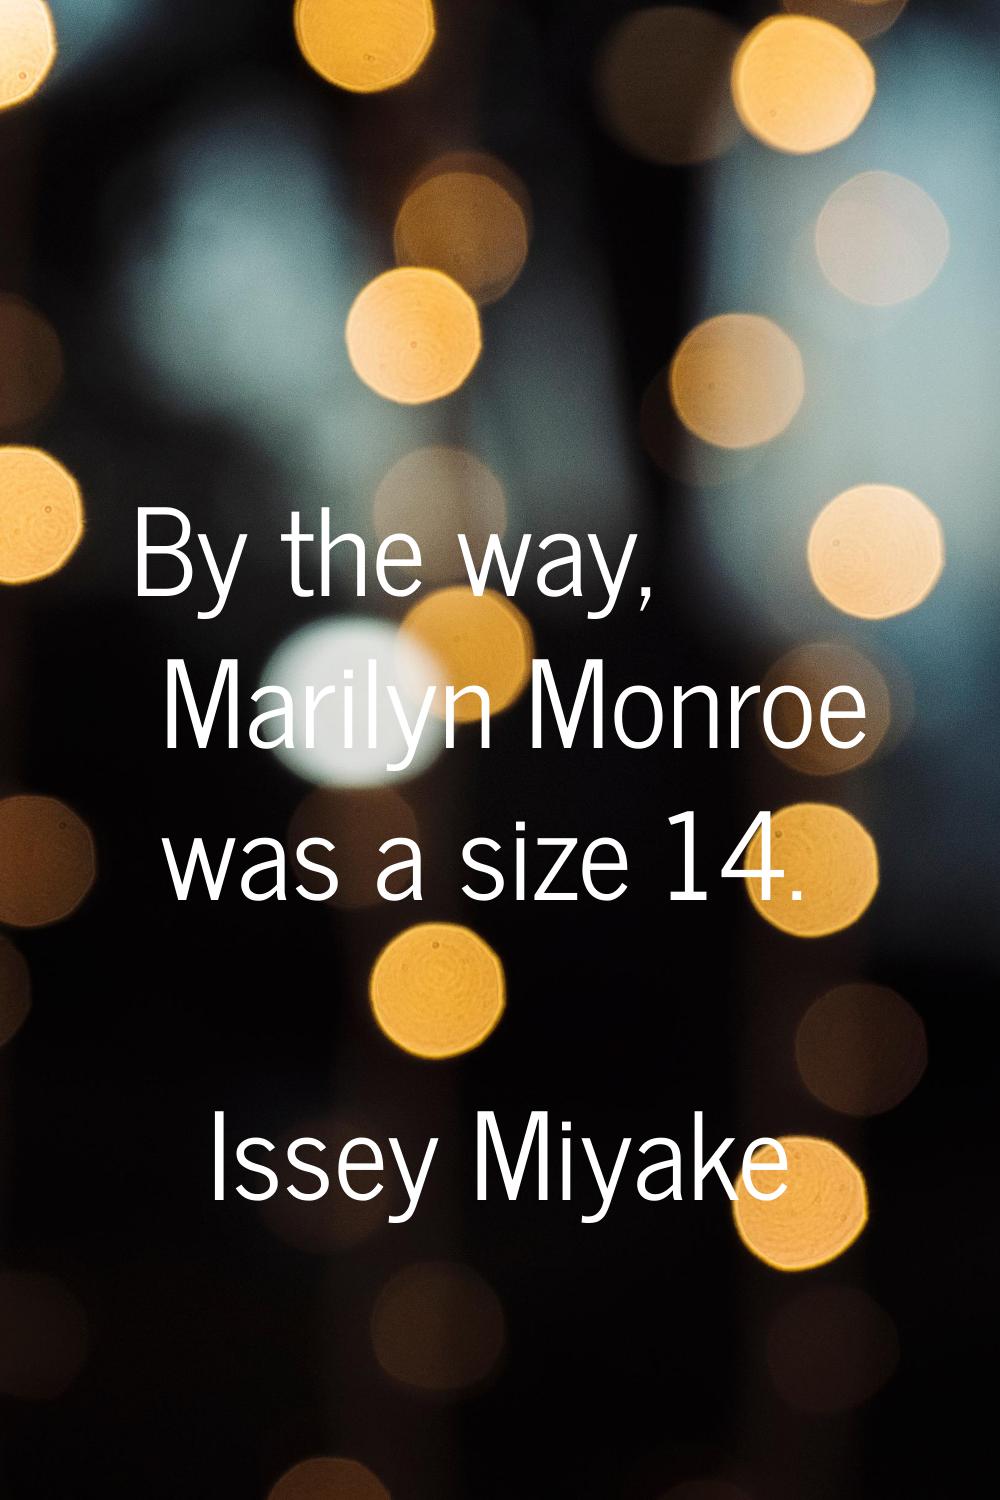 By the way, Marilyn Monroe was a size 14.